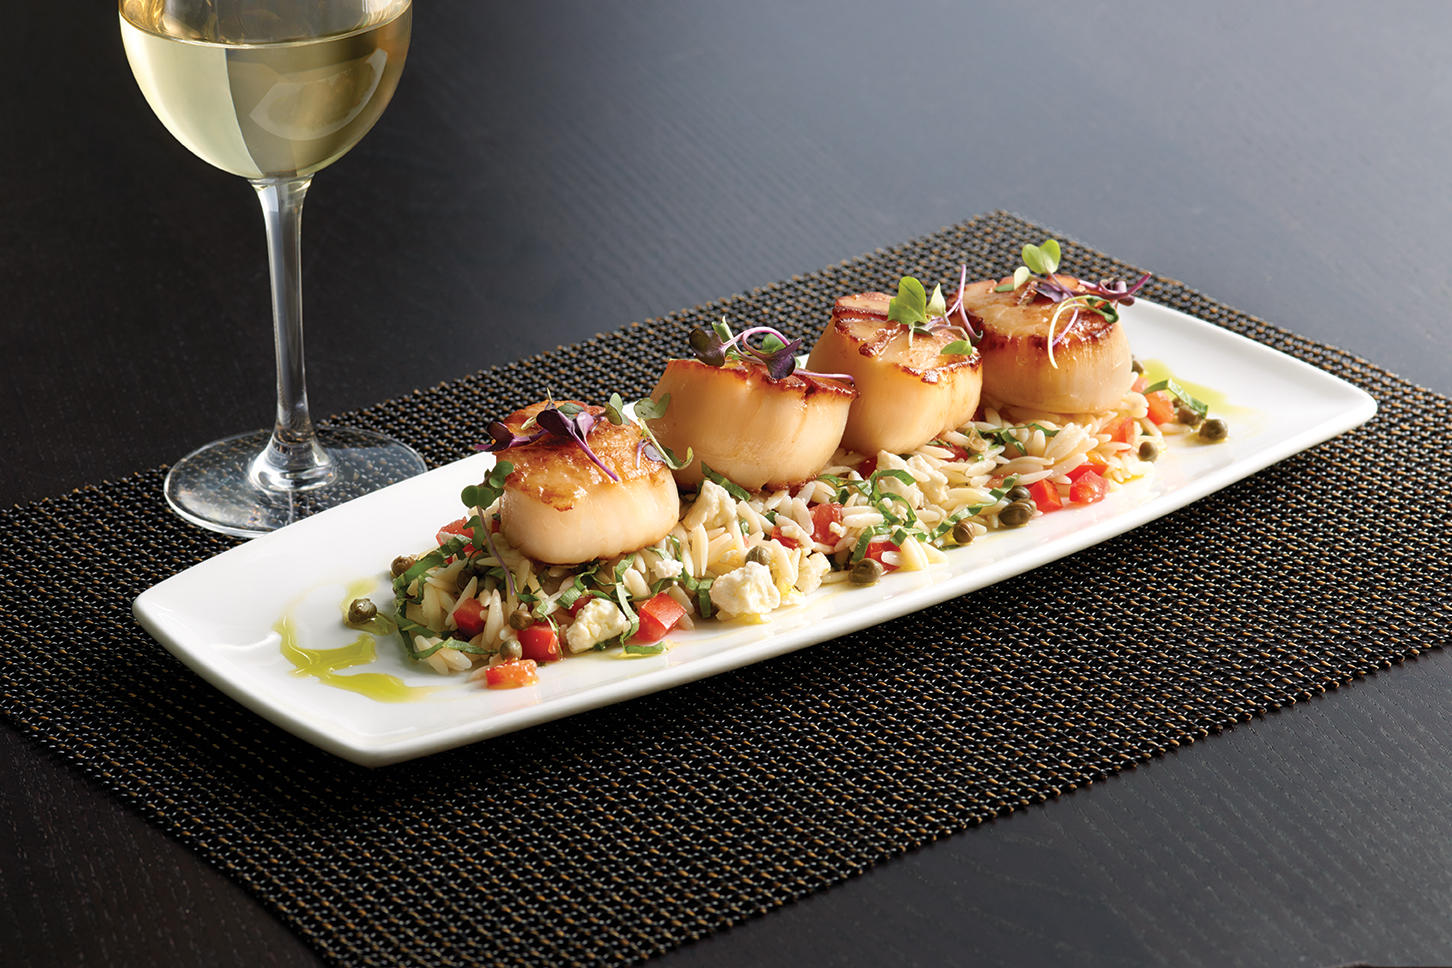 Scallops The Oceanaire Seafood Room Indianapolis (317)955-2277